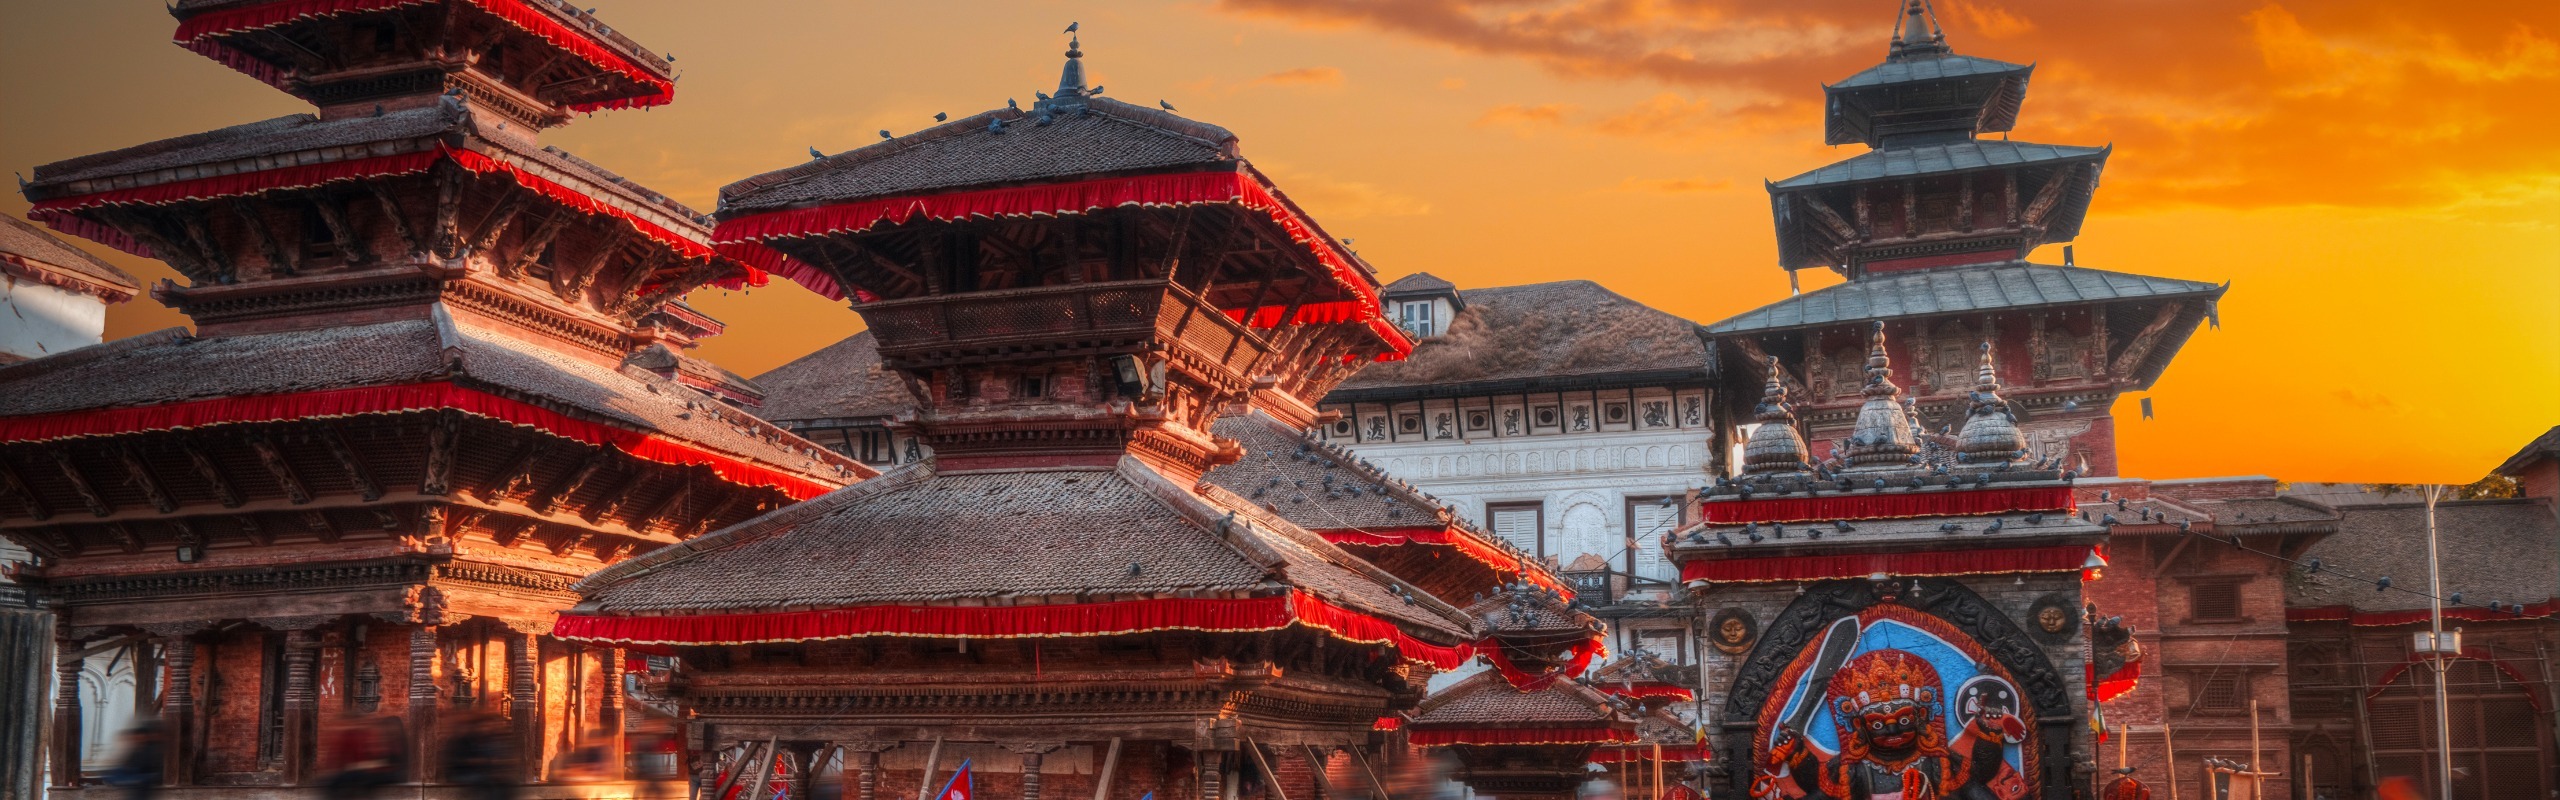 9-Day Classic Nepal Tour